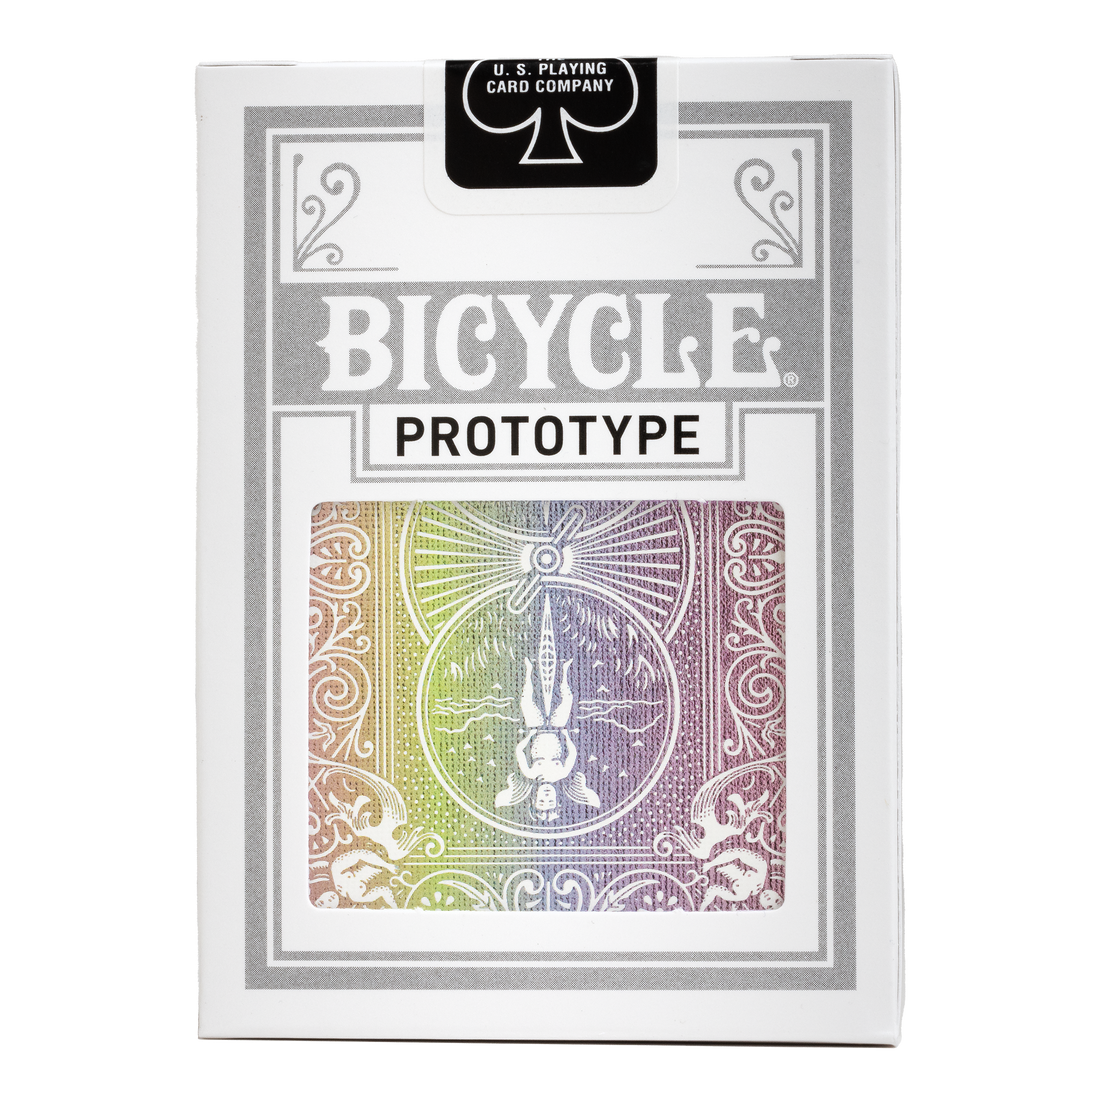 Bicycle Iridescent Cold Foil Prototype Deck